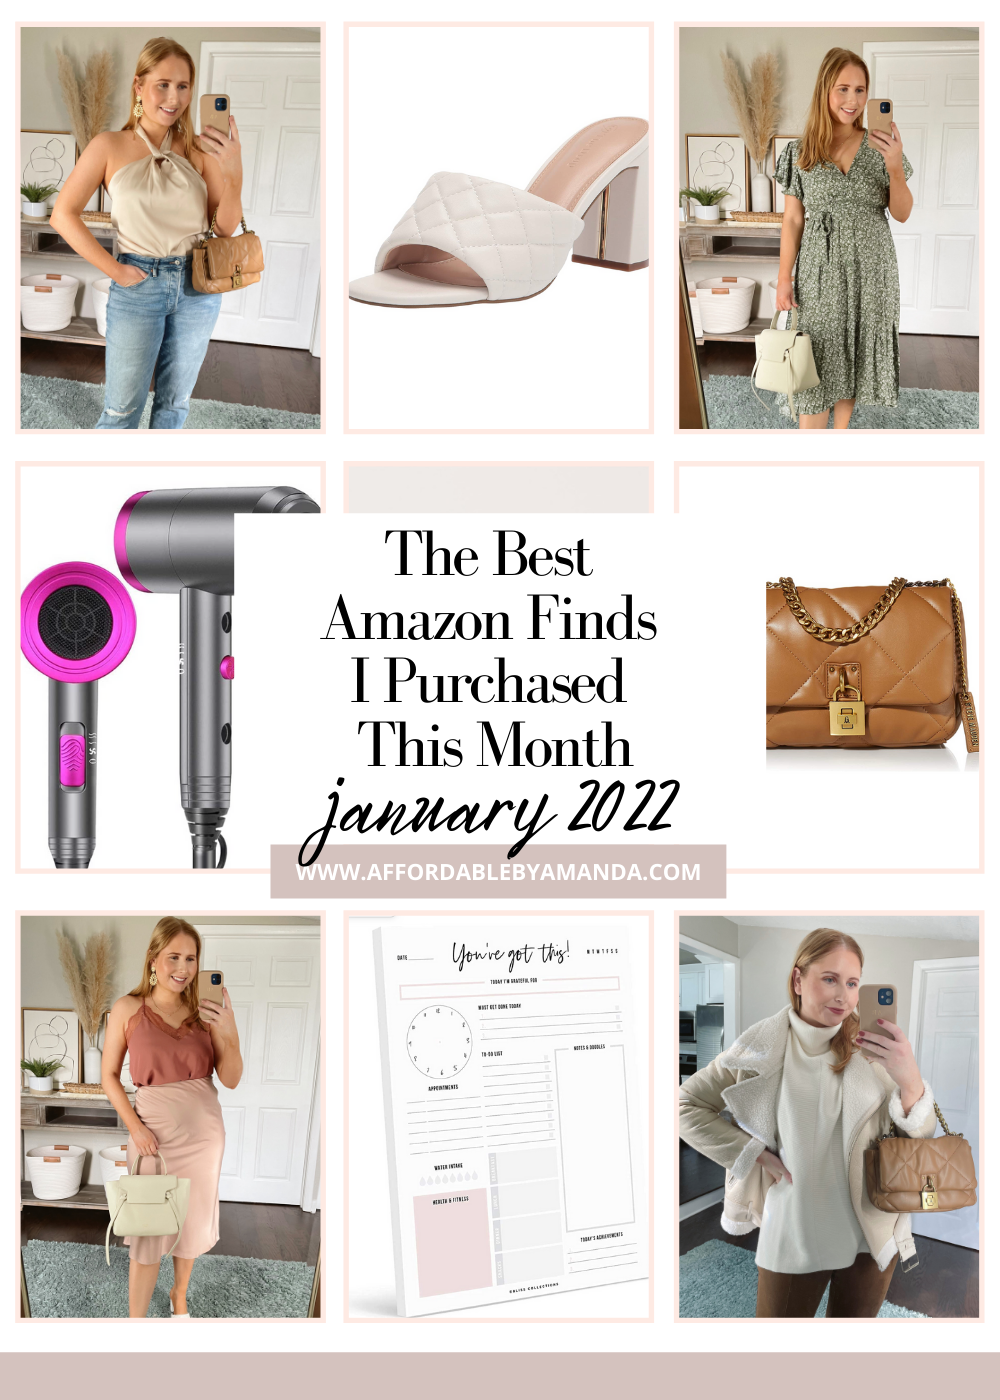 The Best Amazon Finds I Purchased This Month - Affordable by Amanda